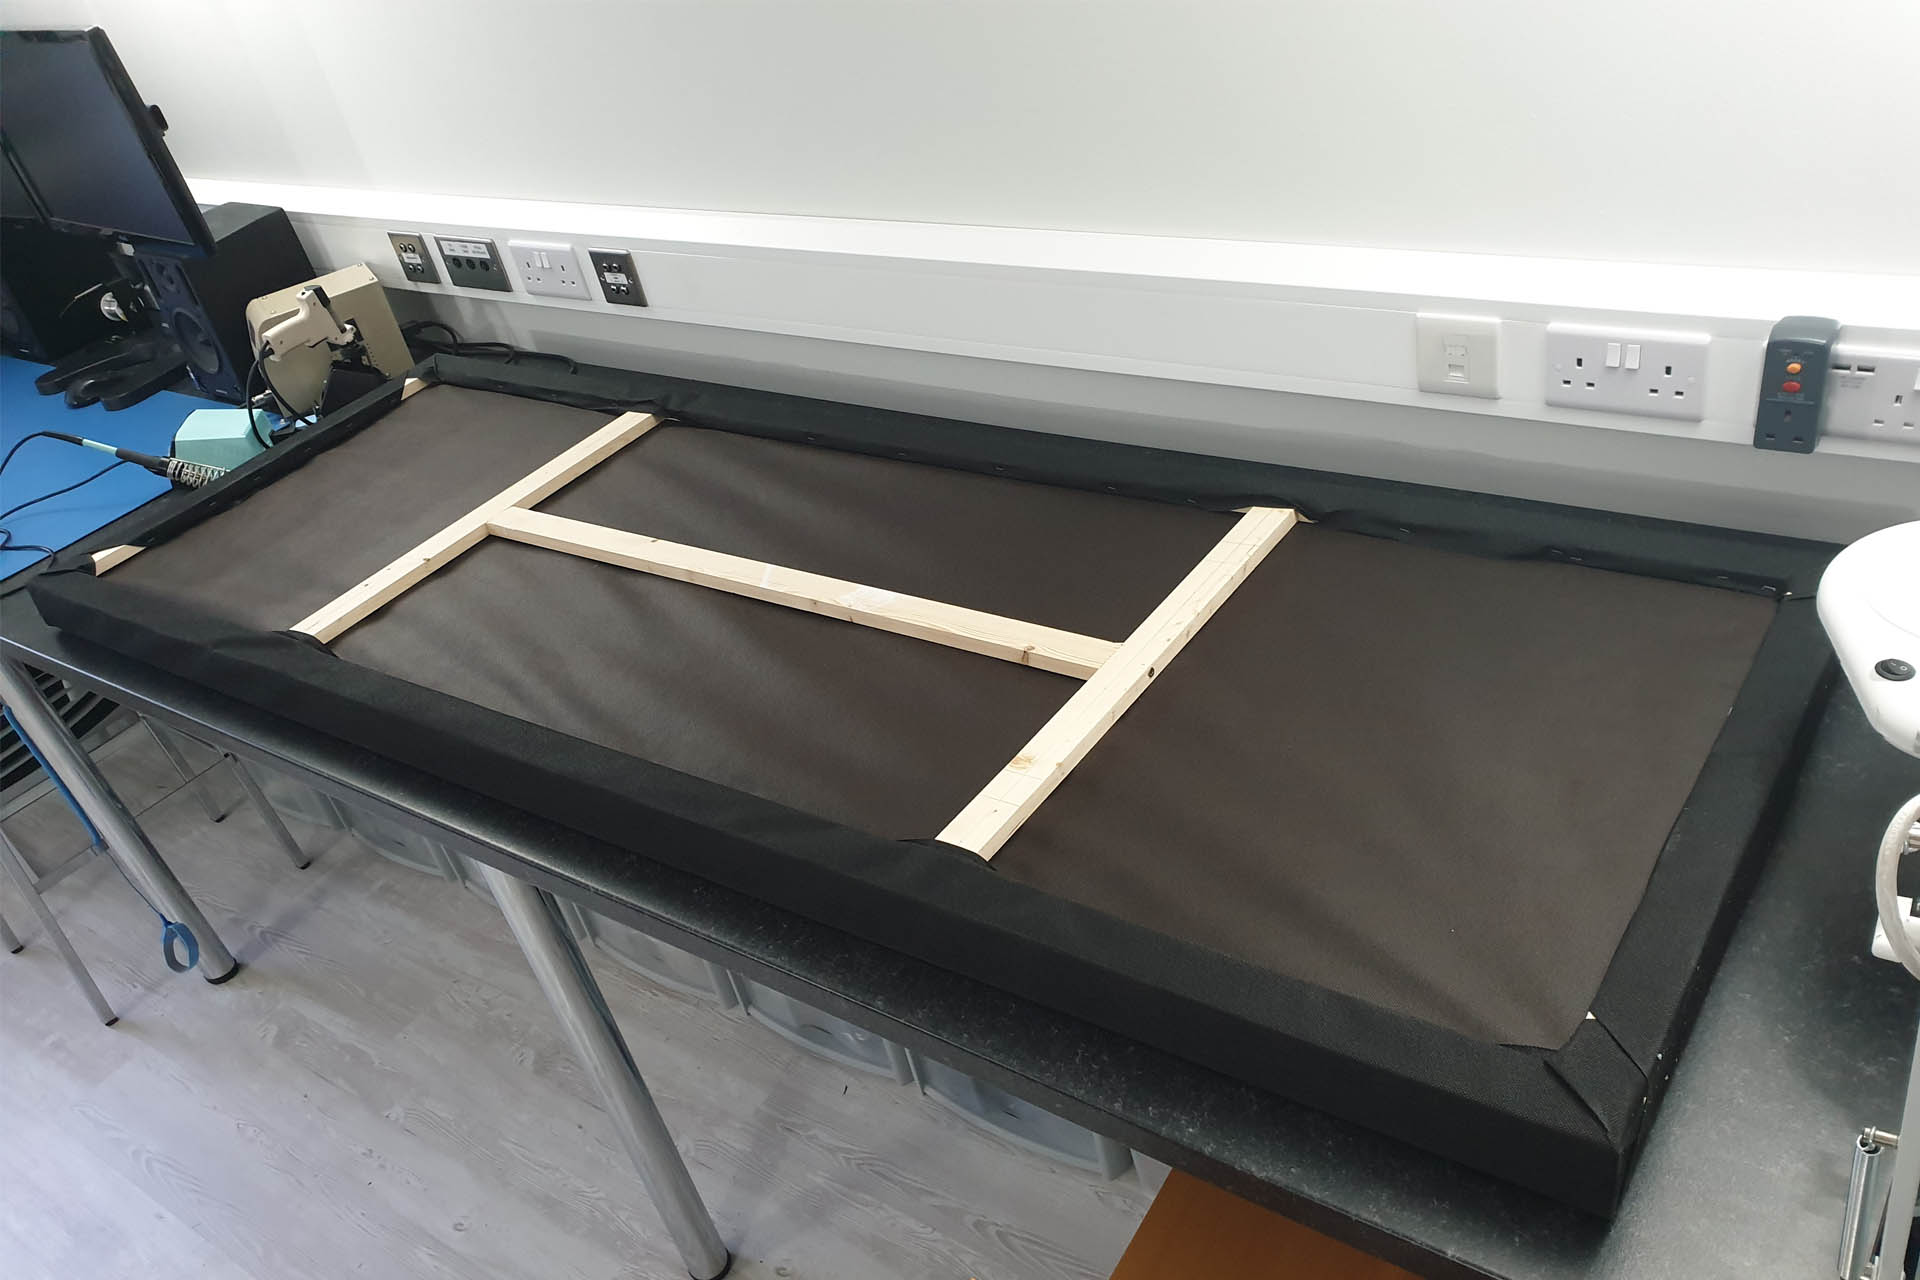 DIY acoustic panel with vertical brace to stop heavy foam sagging